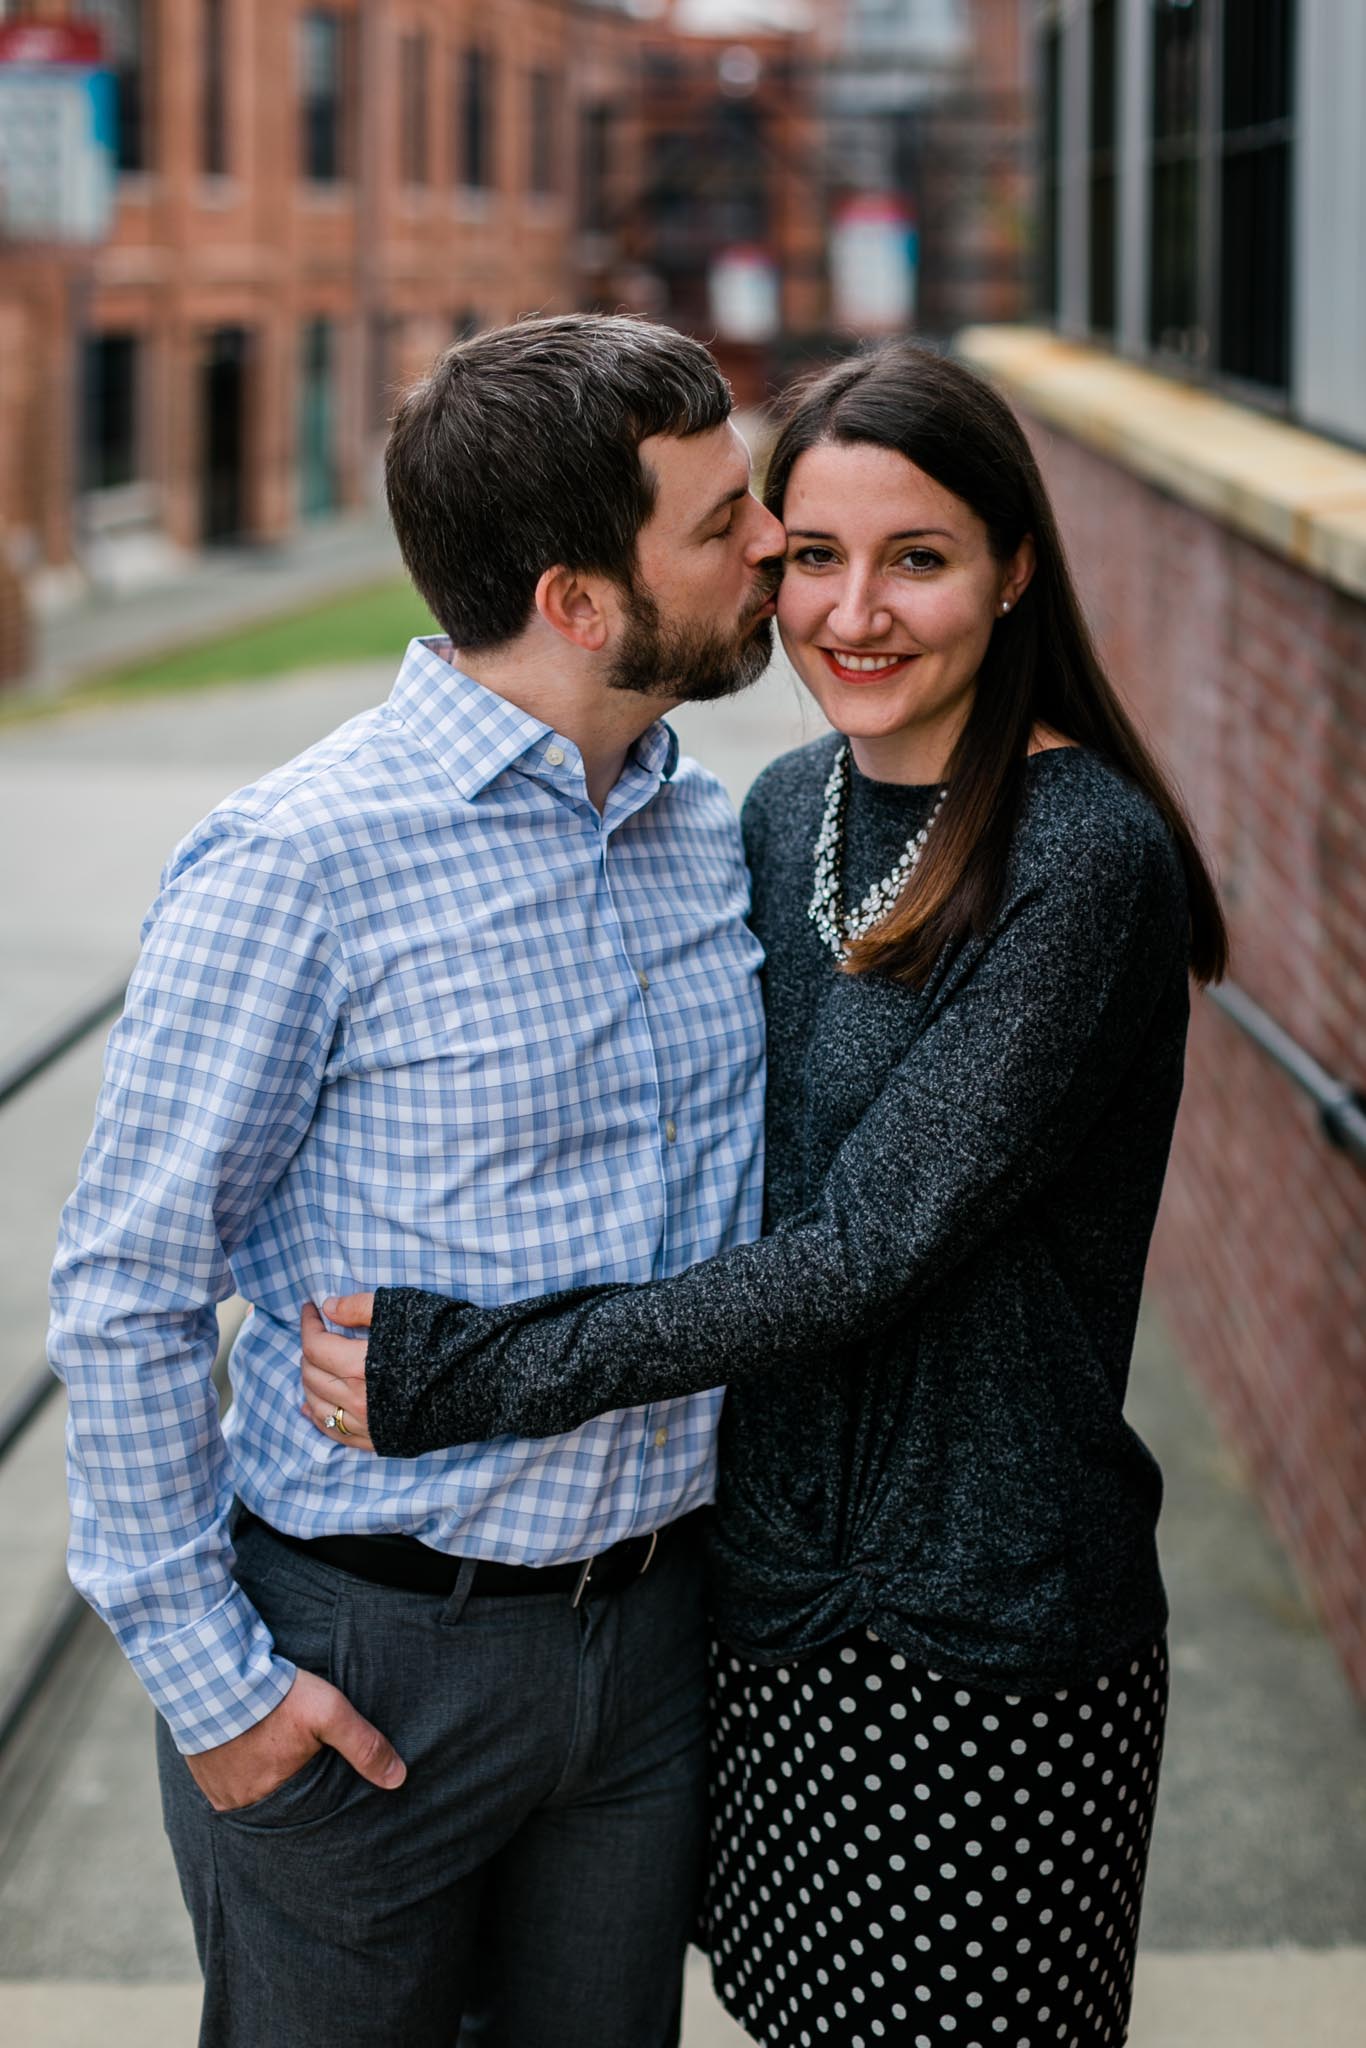 Husband kissing wife on cheek in Downtown Durham | Durham Photographer | By G. Lin Photography